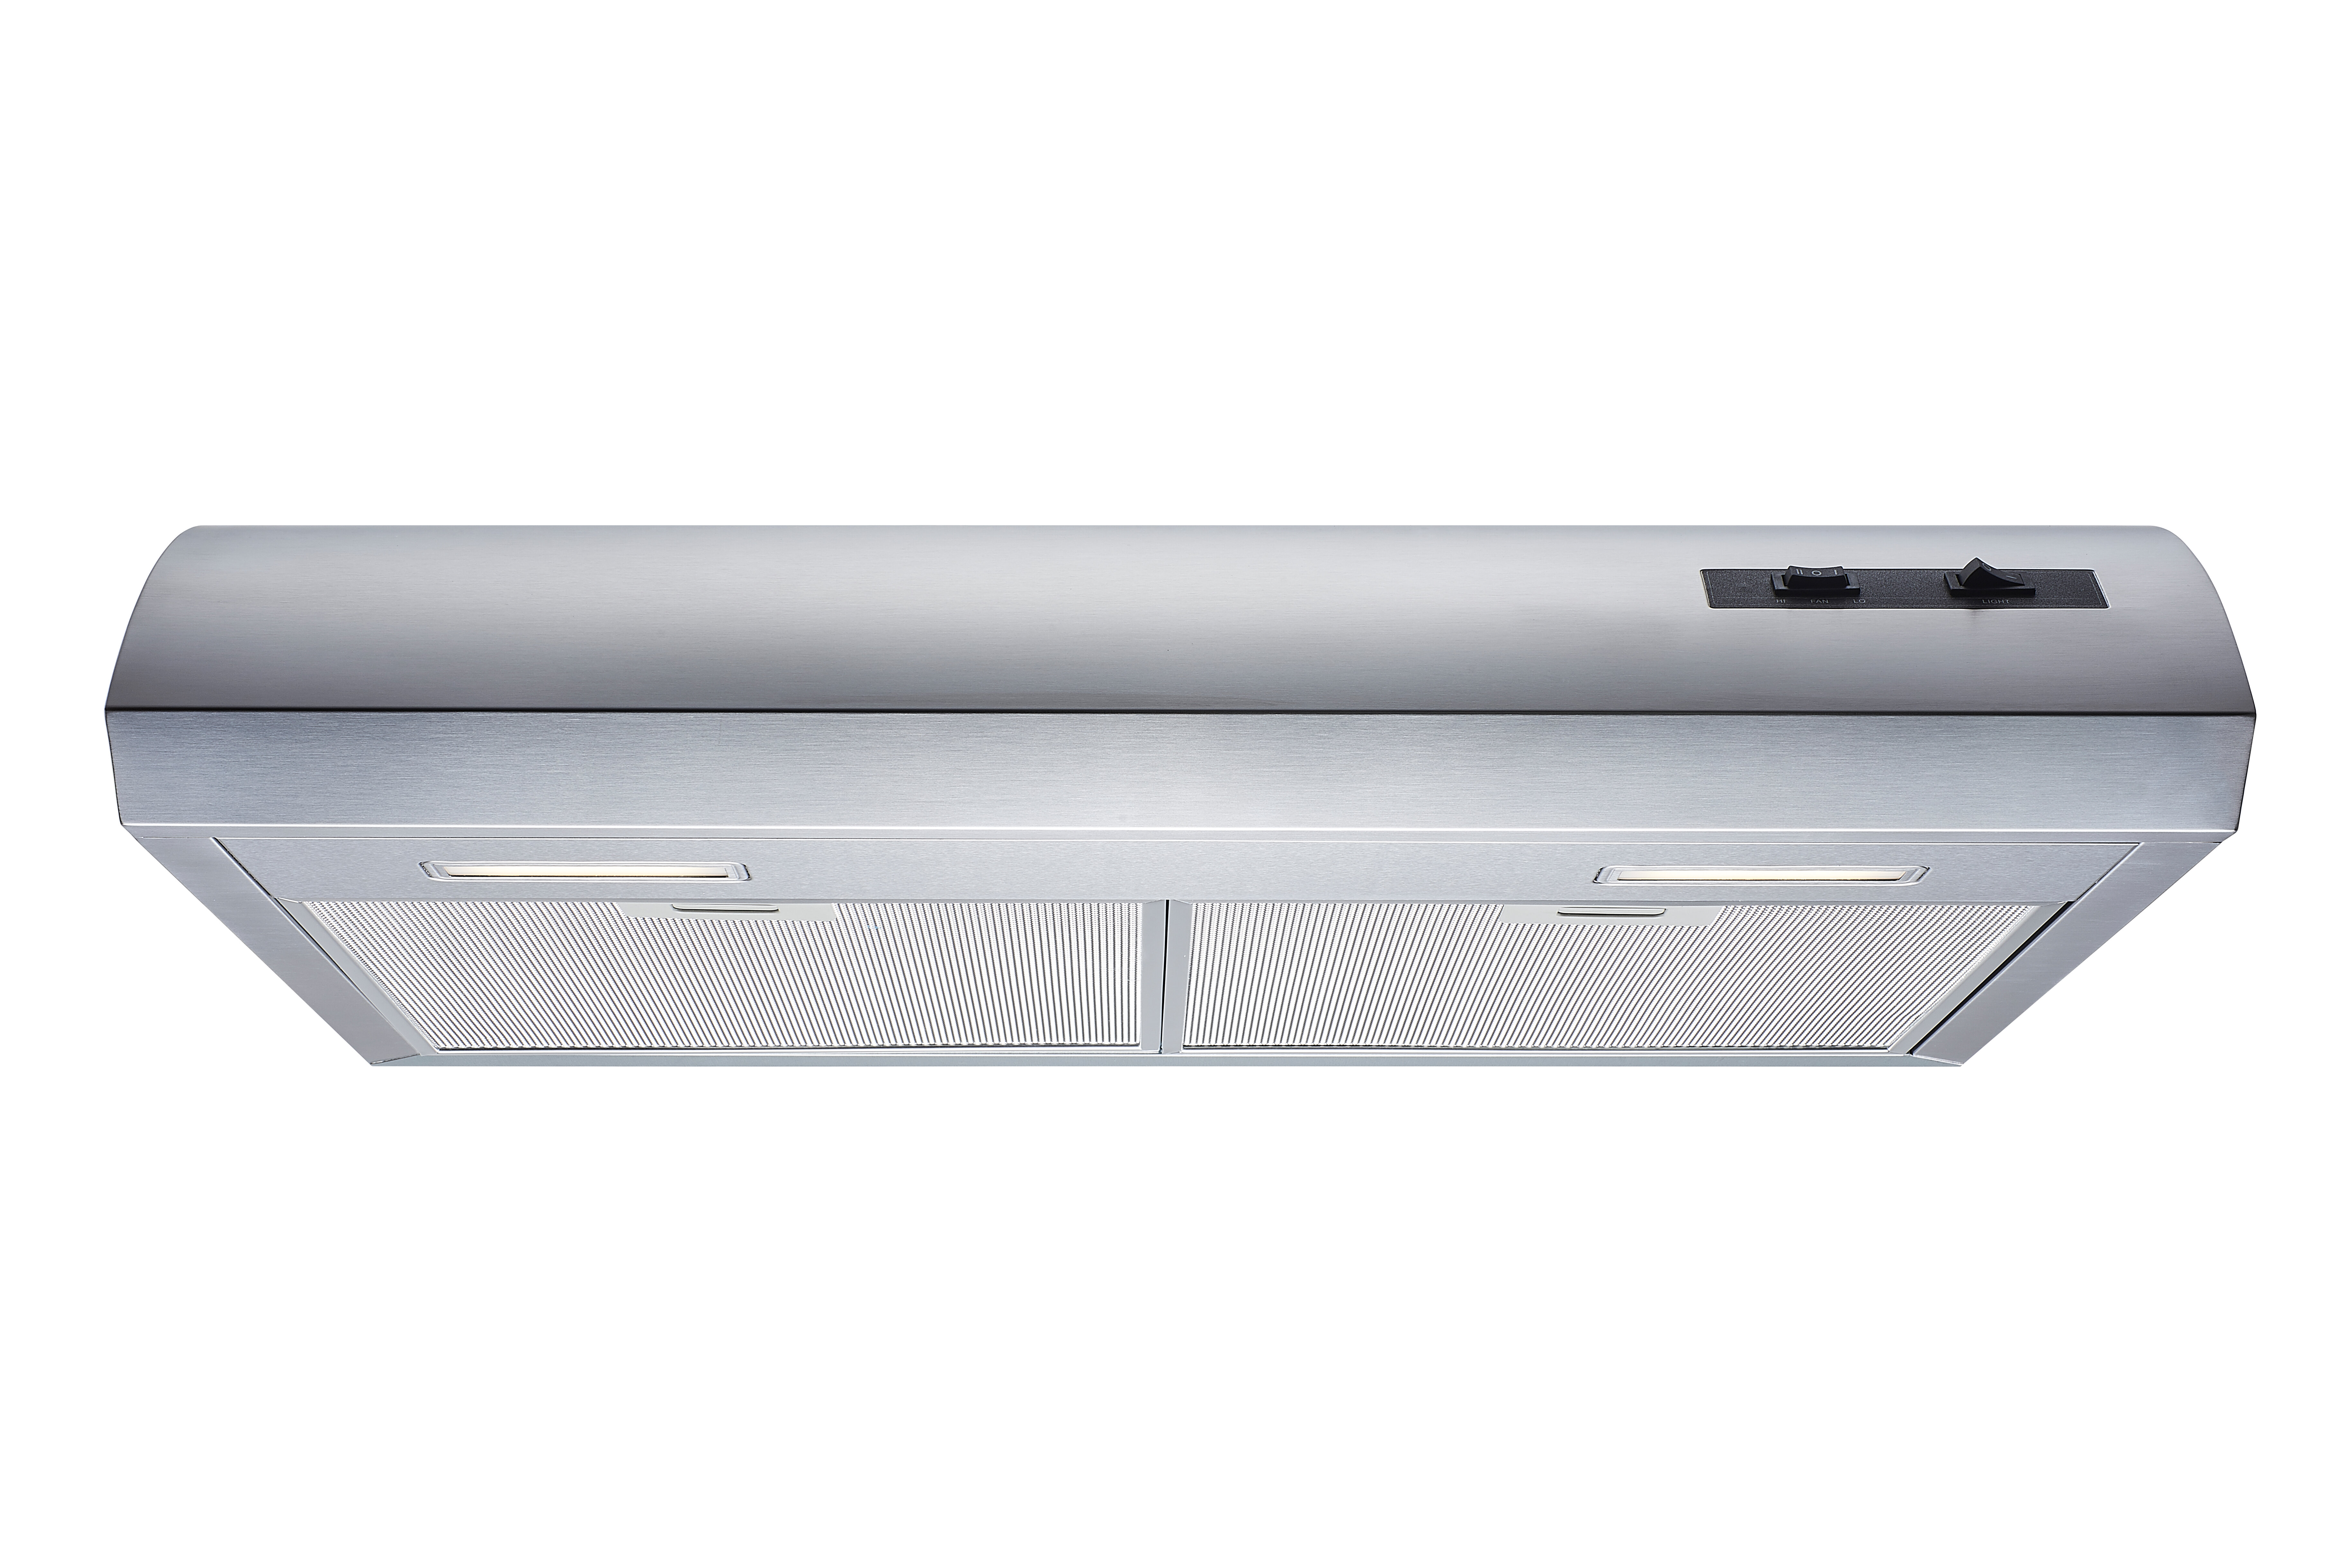 Range Hood 30 inch Under Cabinet, Stainless Steel Kitchen Vent Hood 280CFM, Built-In Kitchen Stove Hood w/Rocker Button Control, Ducted/Ductless